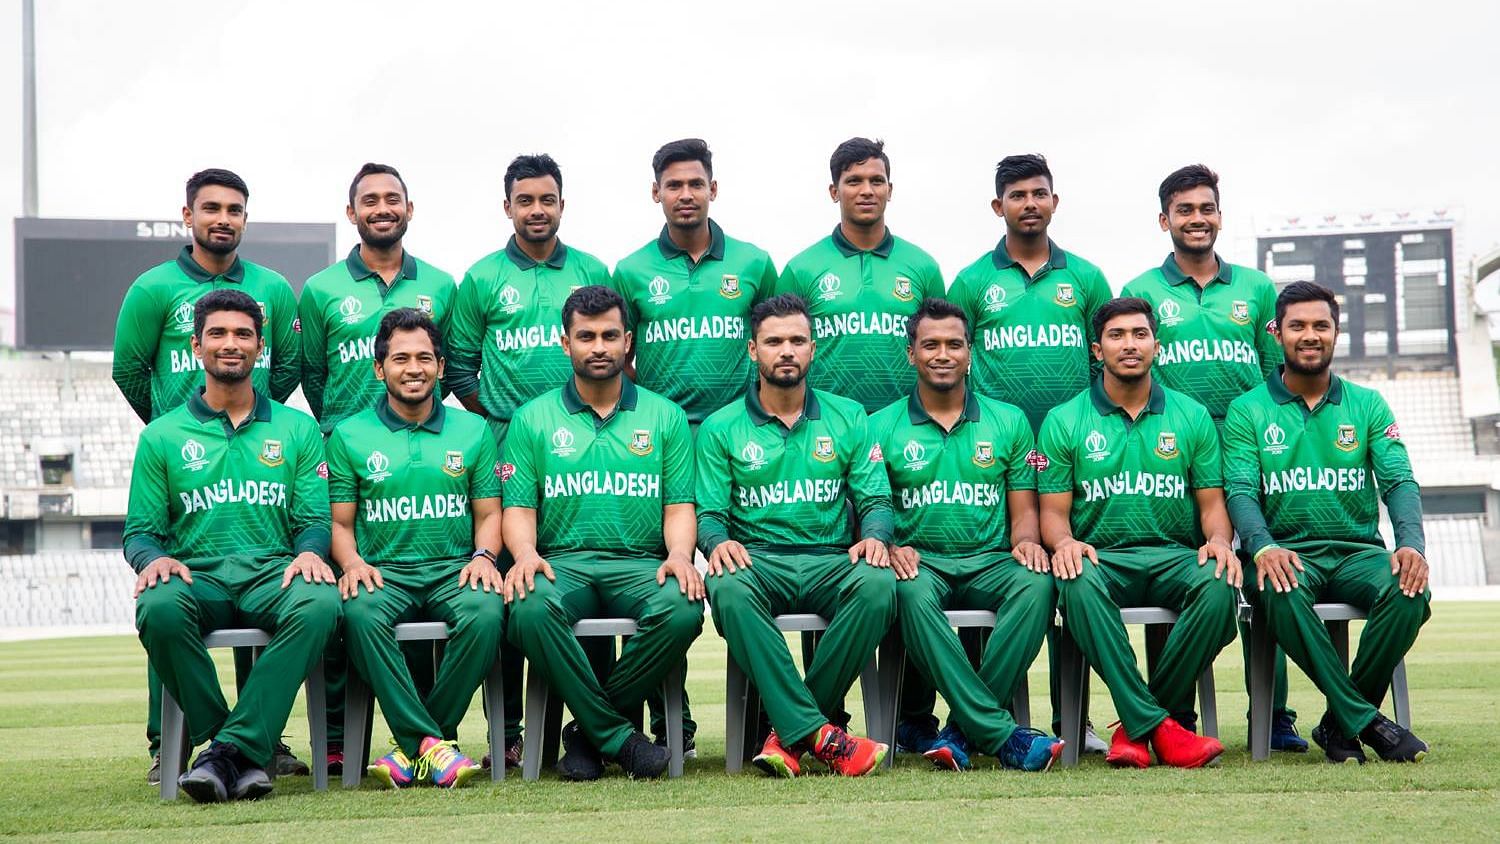 The Bangladesh cricket board turned down players’ request to resume training considering the ongoing situation related to COVID-19.